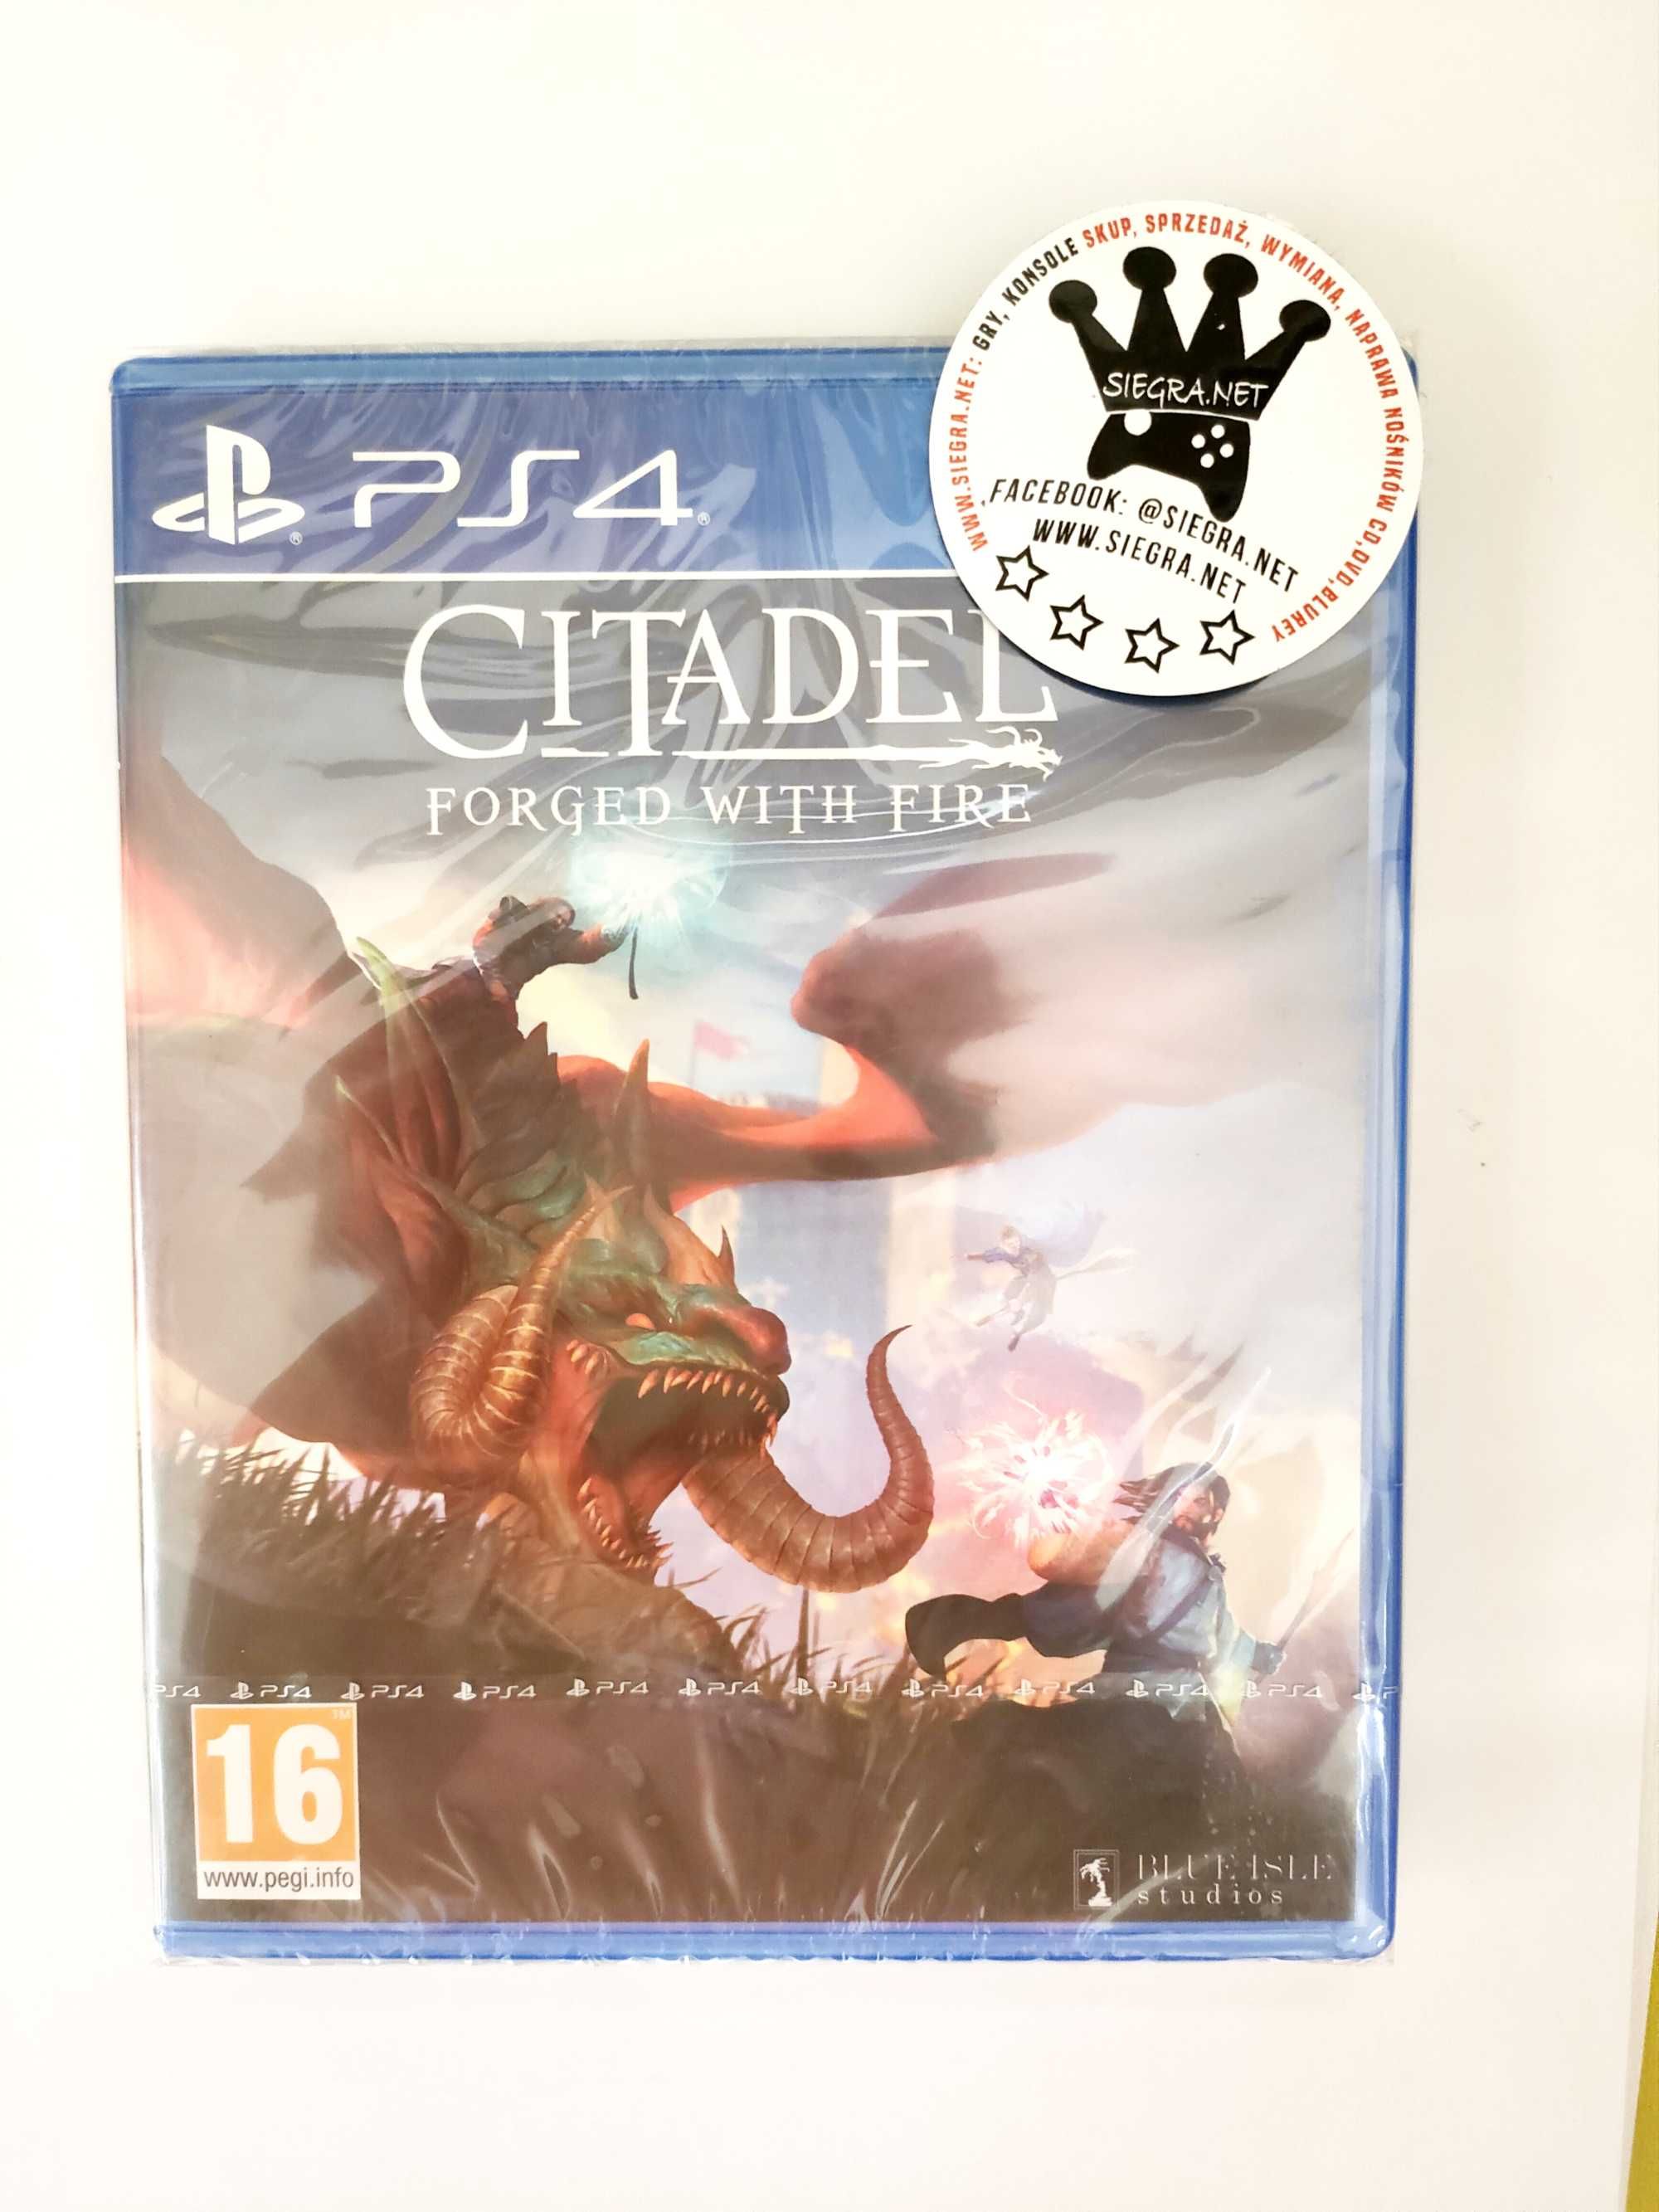 Citadel Forged with Fire Ps4 nowa